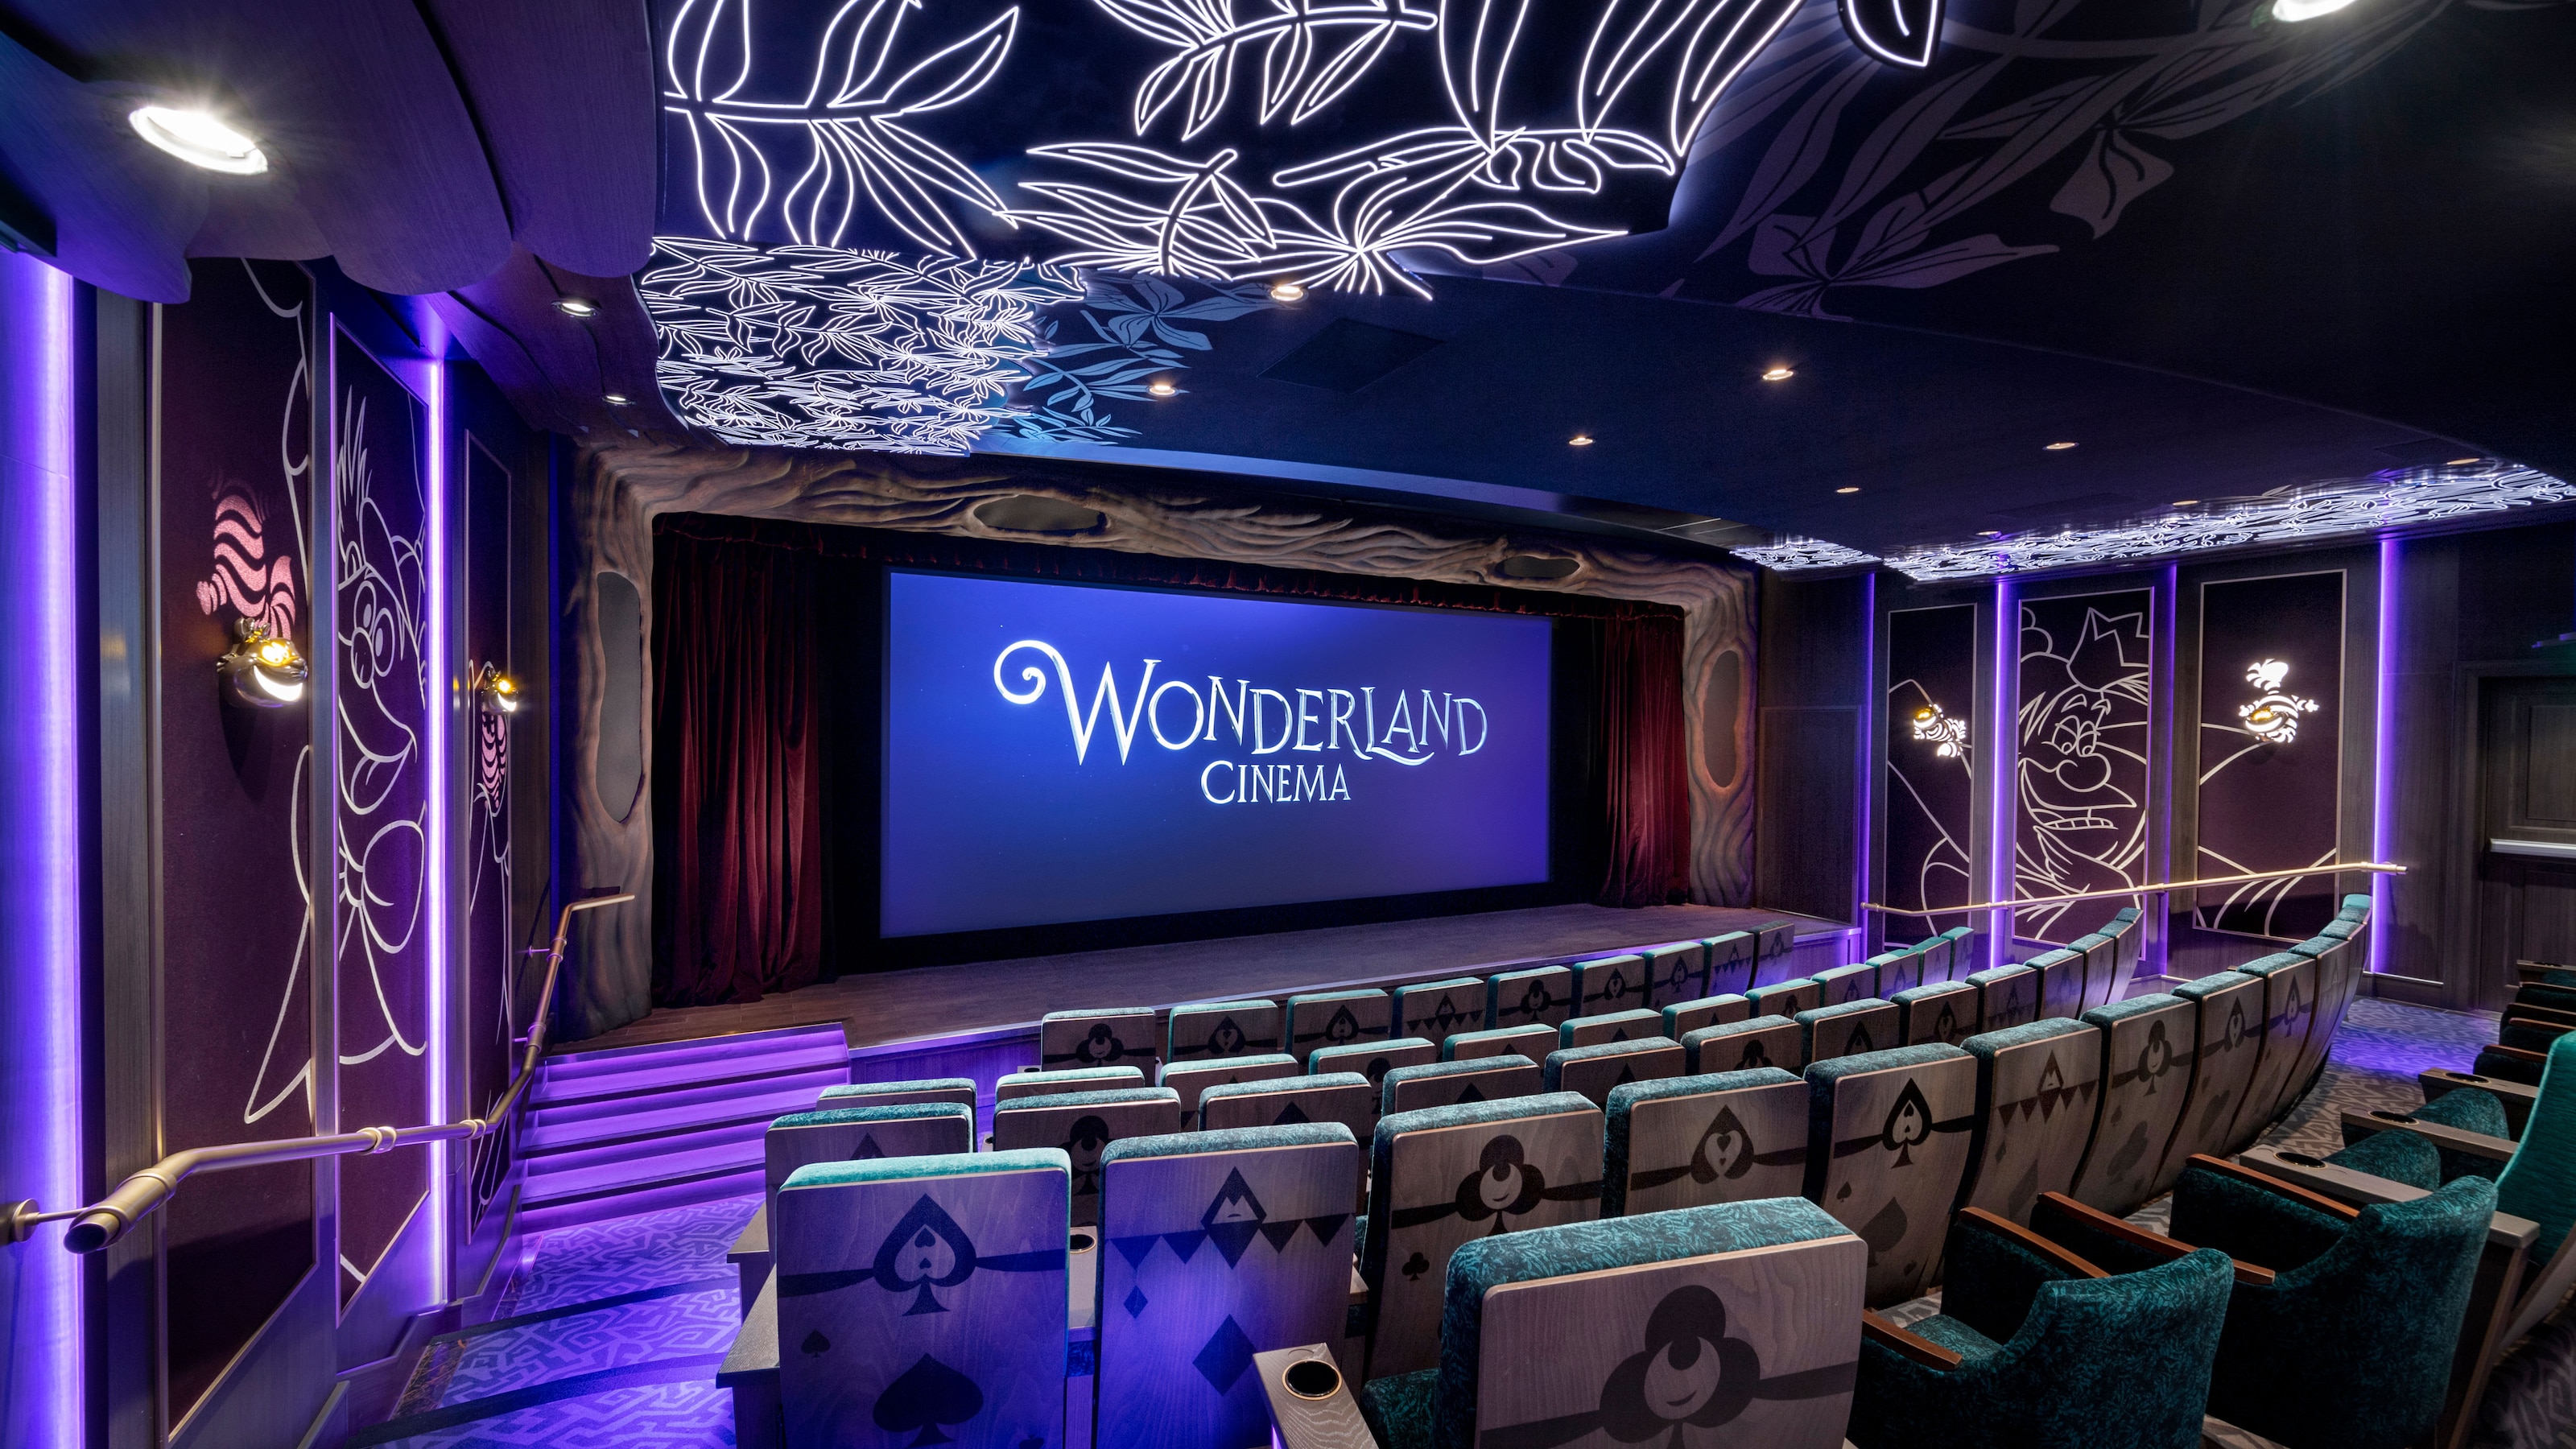 A movie theater aboard a Disney cruise ship with a screen reading ‘Wonderland Cinema’ 